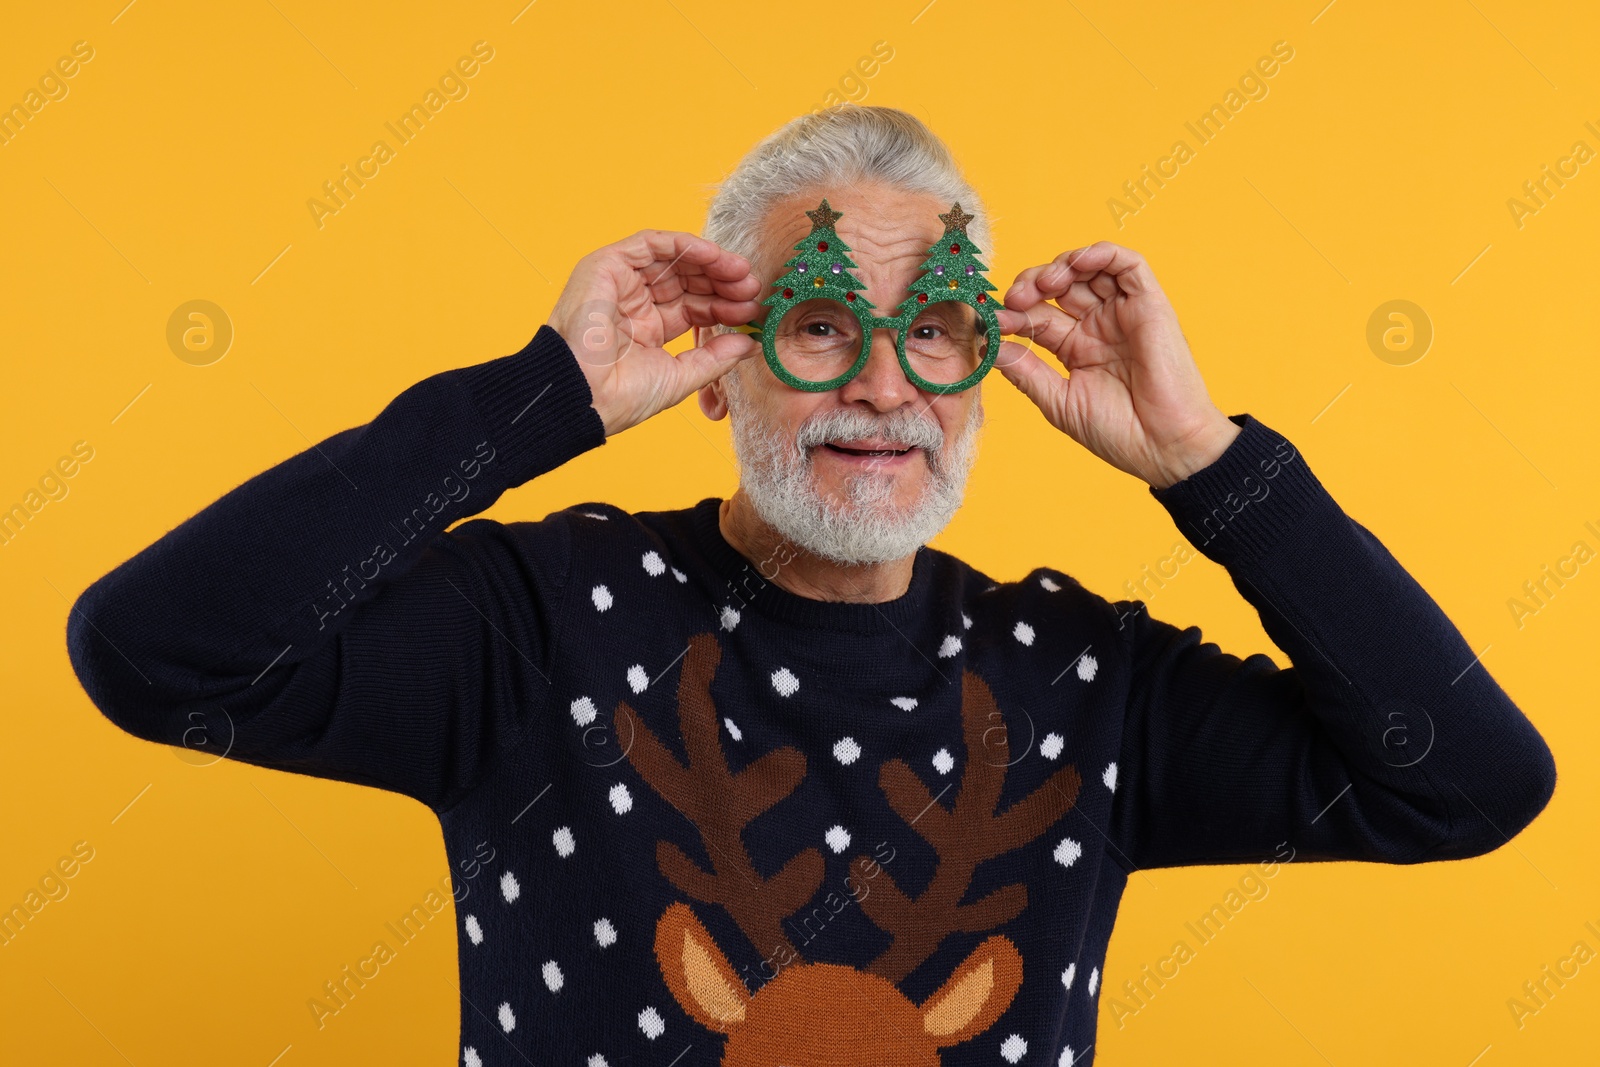 Photo of Senior man in Christmas sweater and funny glasses against orange background